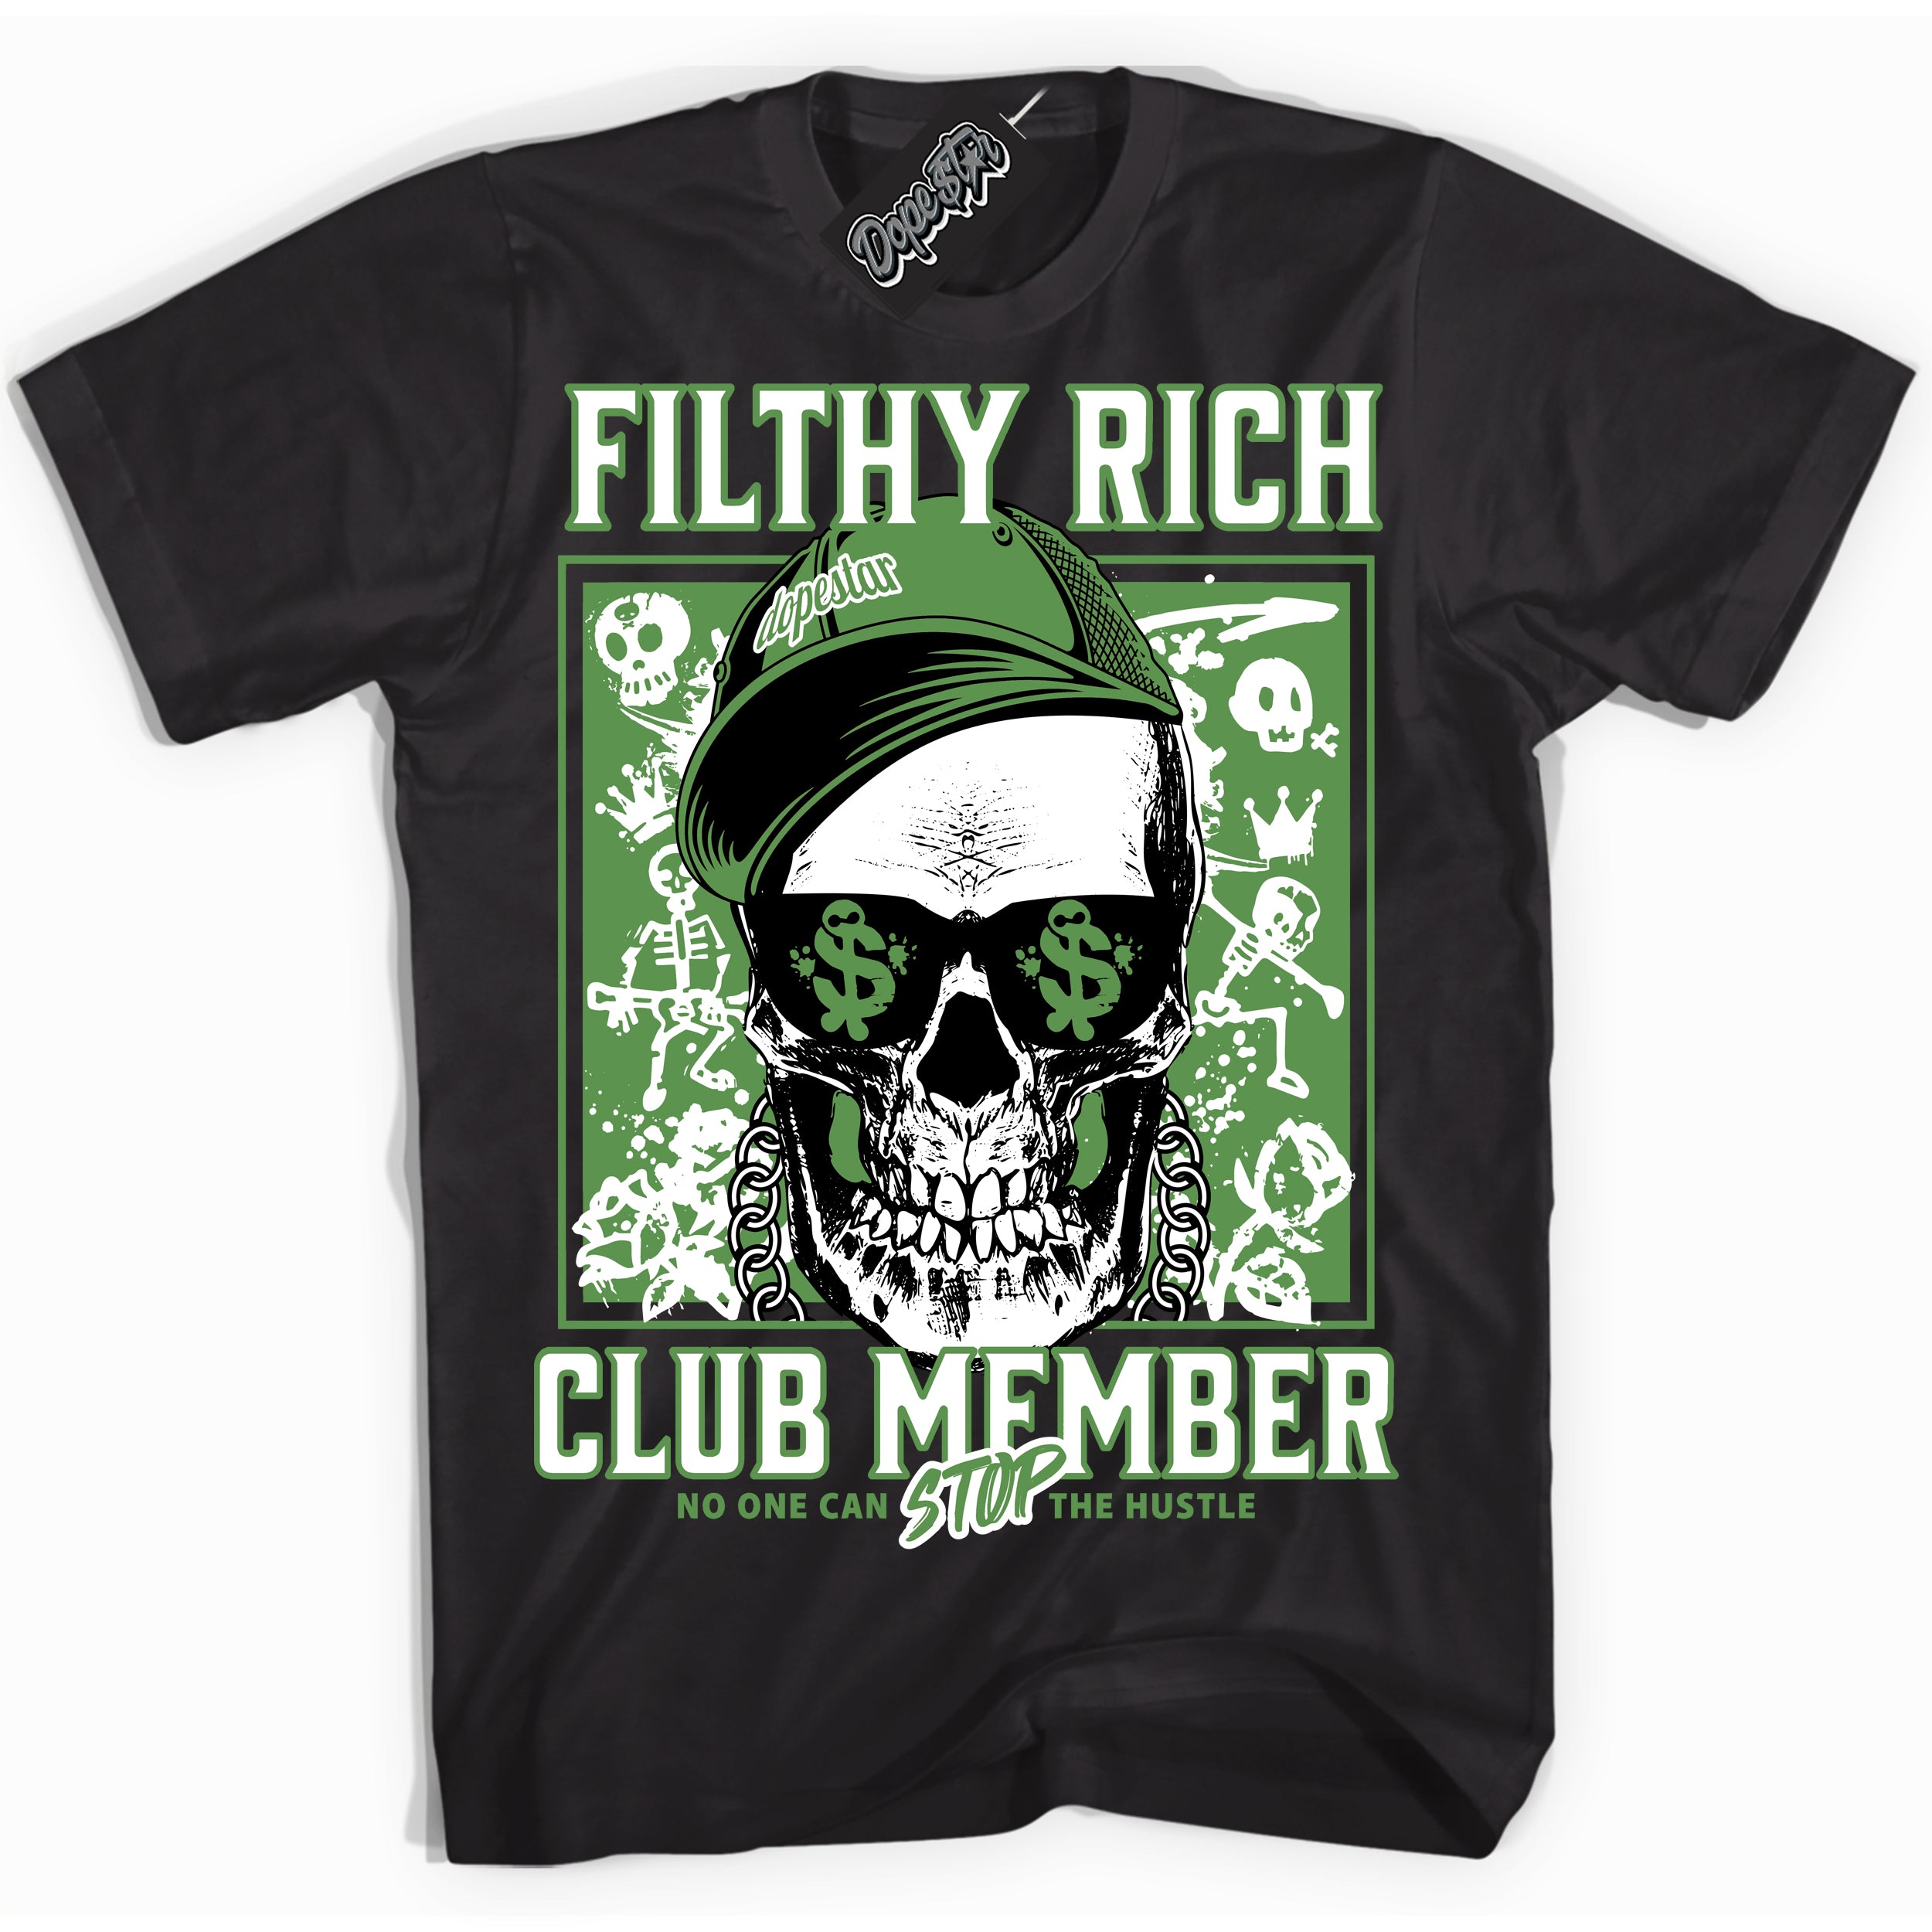 Cool Black Shirt with “ Filthy Rich” design that perfectly matches Chlorophyll 1s Sneakers.